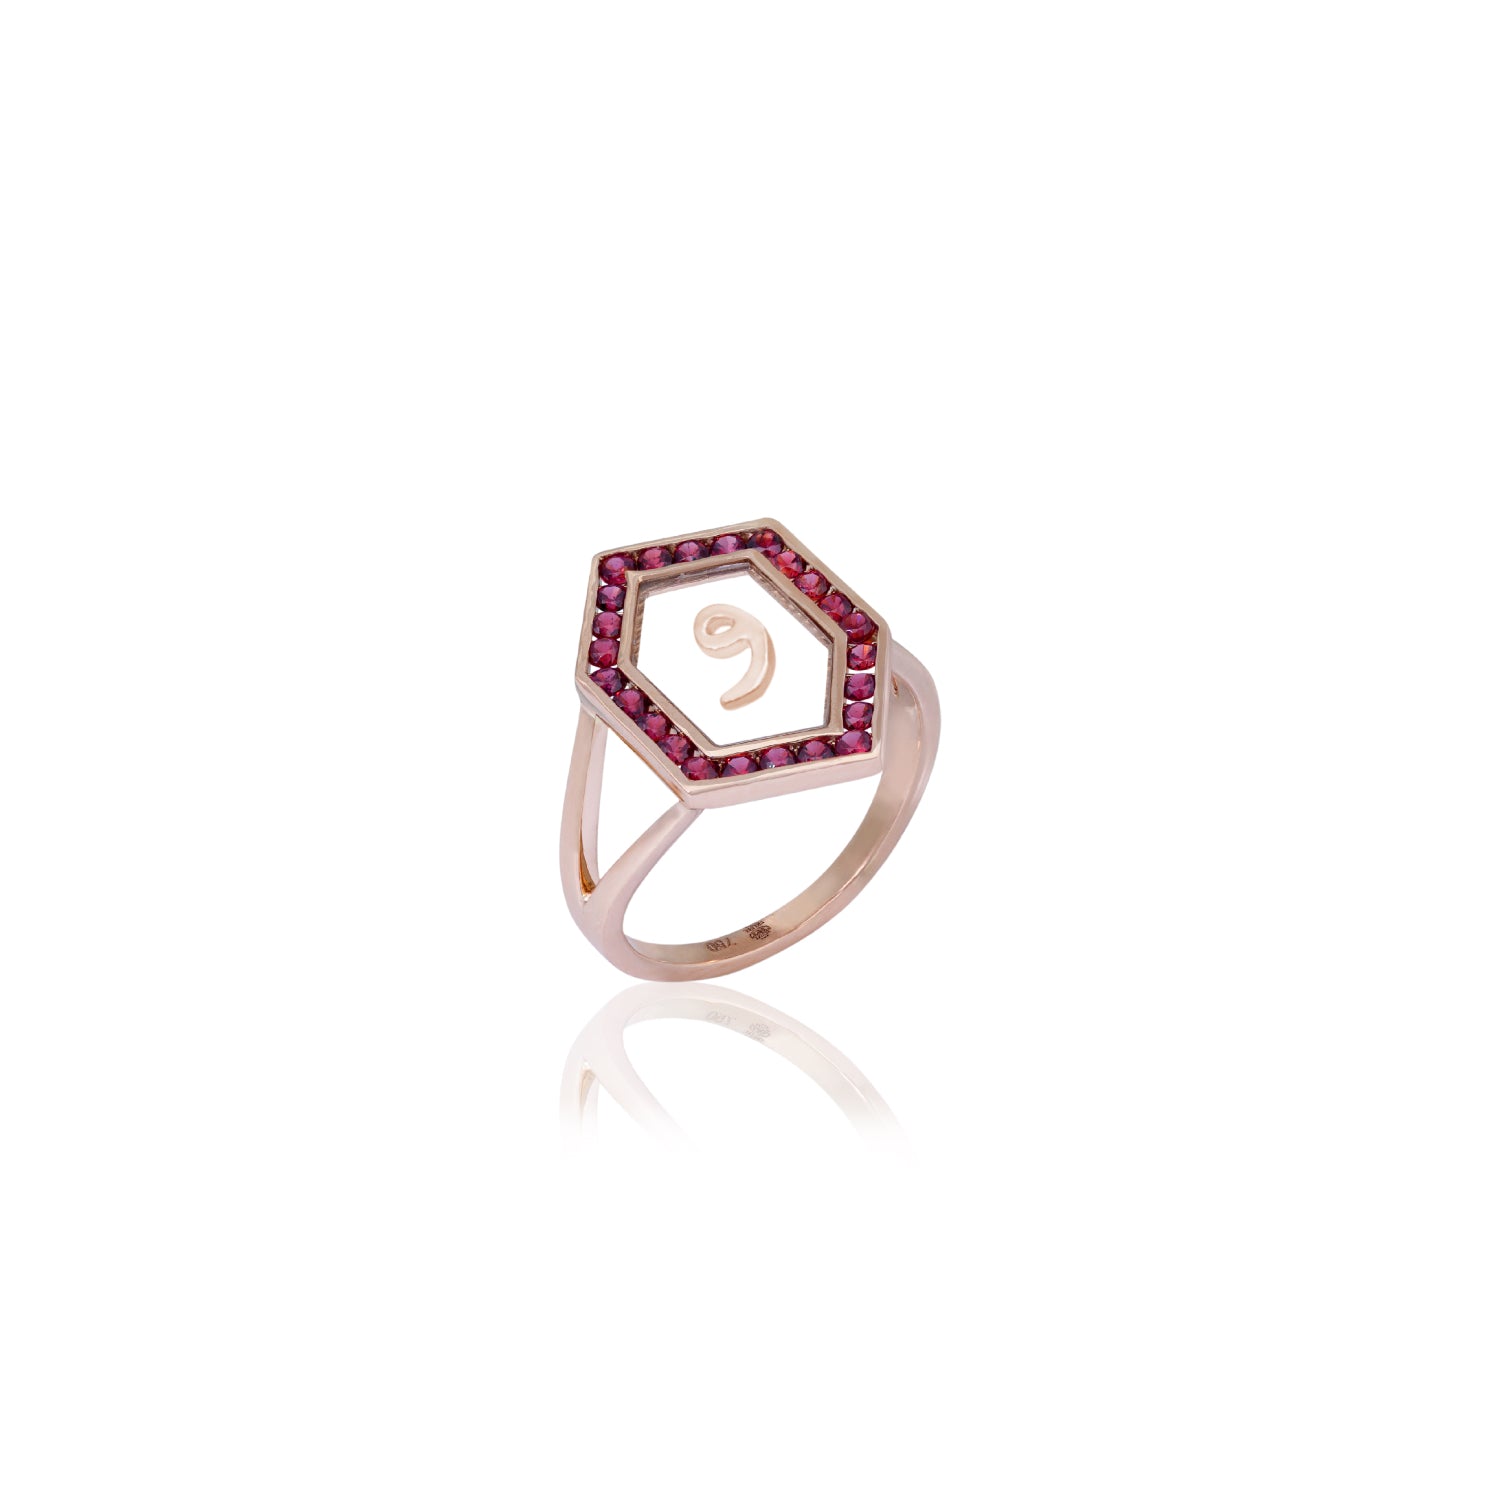 Qamoos 1.0 Letter و Ruby Ring in Rose Gold